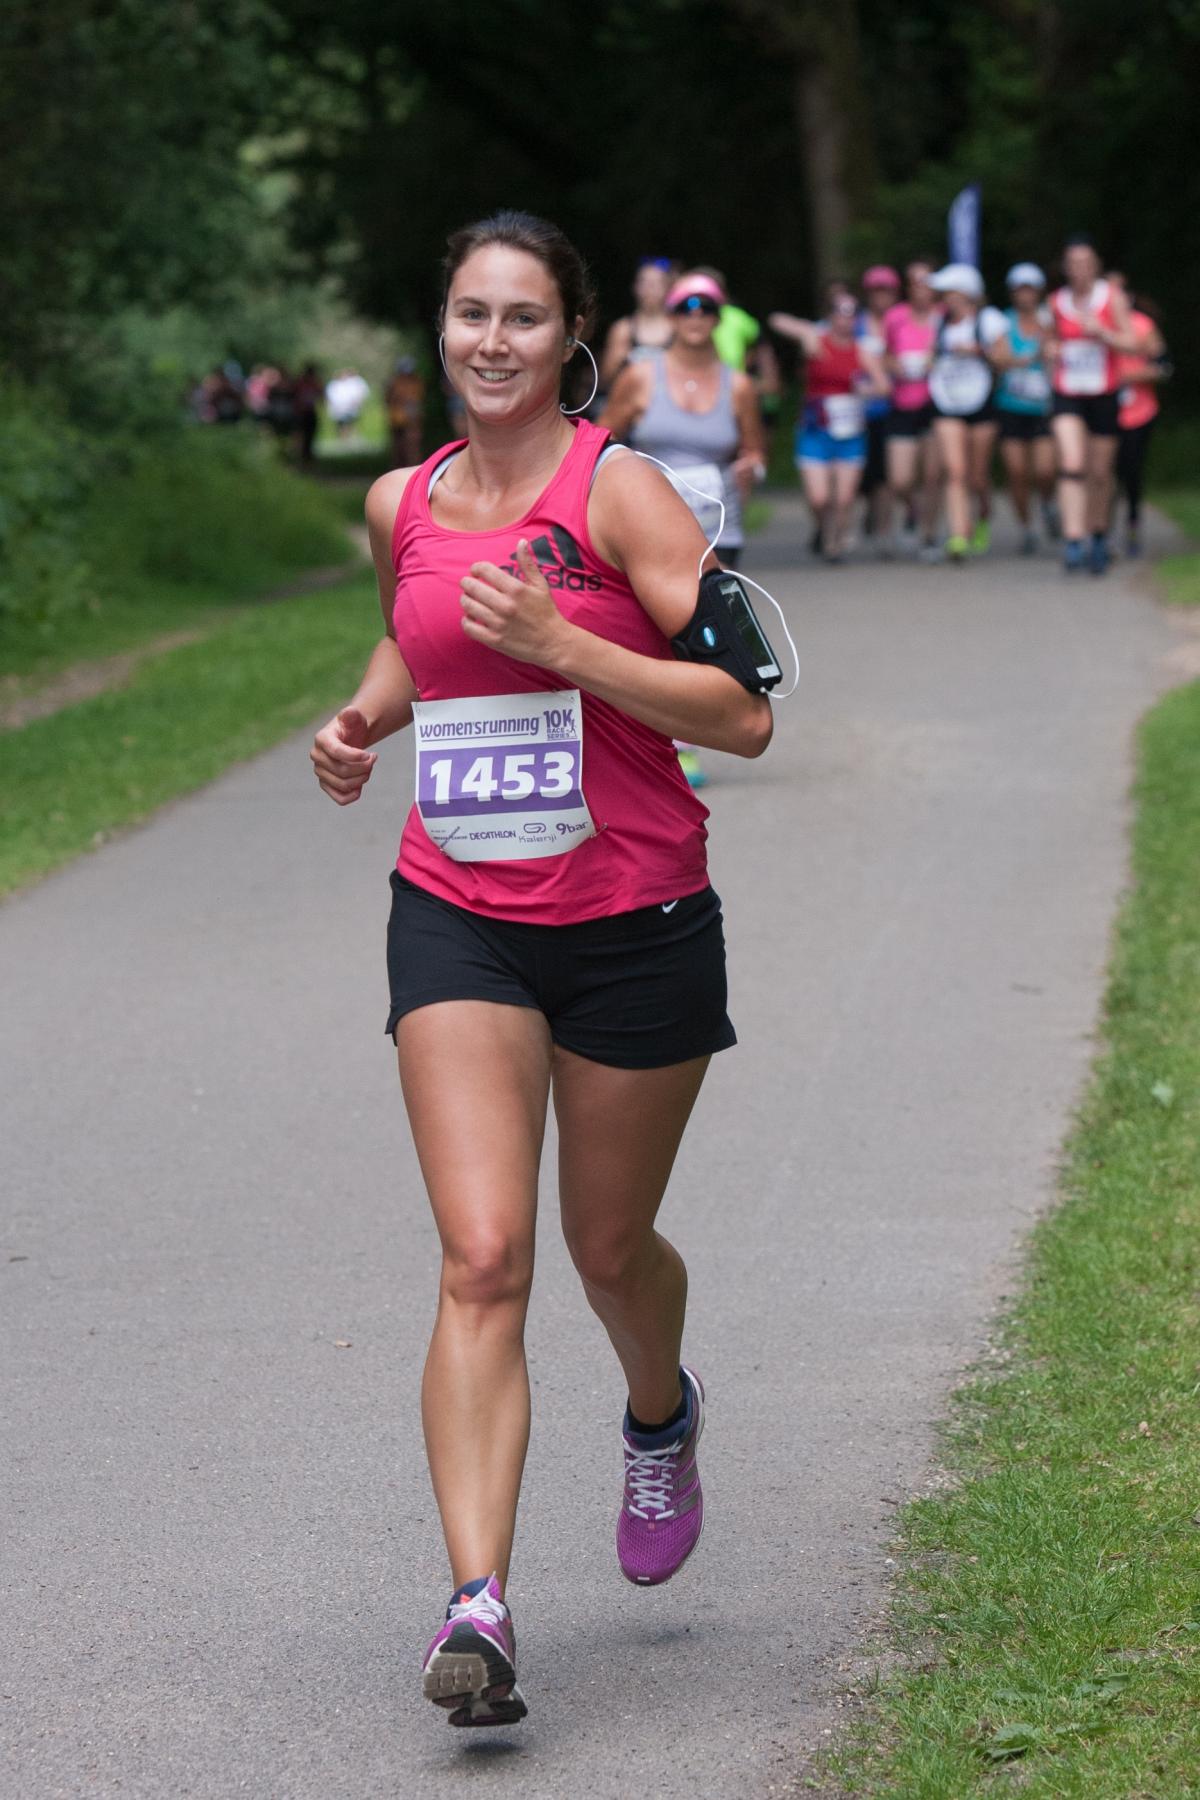 Women's Running 10k on Southampton Common. Weekend in Pictures 21/06/2014 - 23/06/2014.